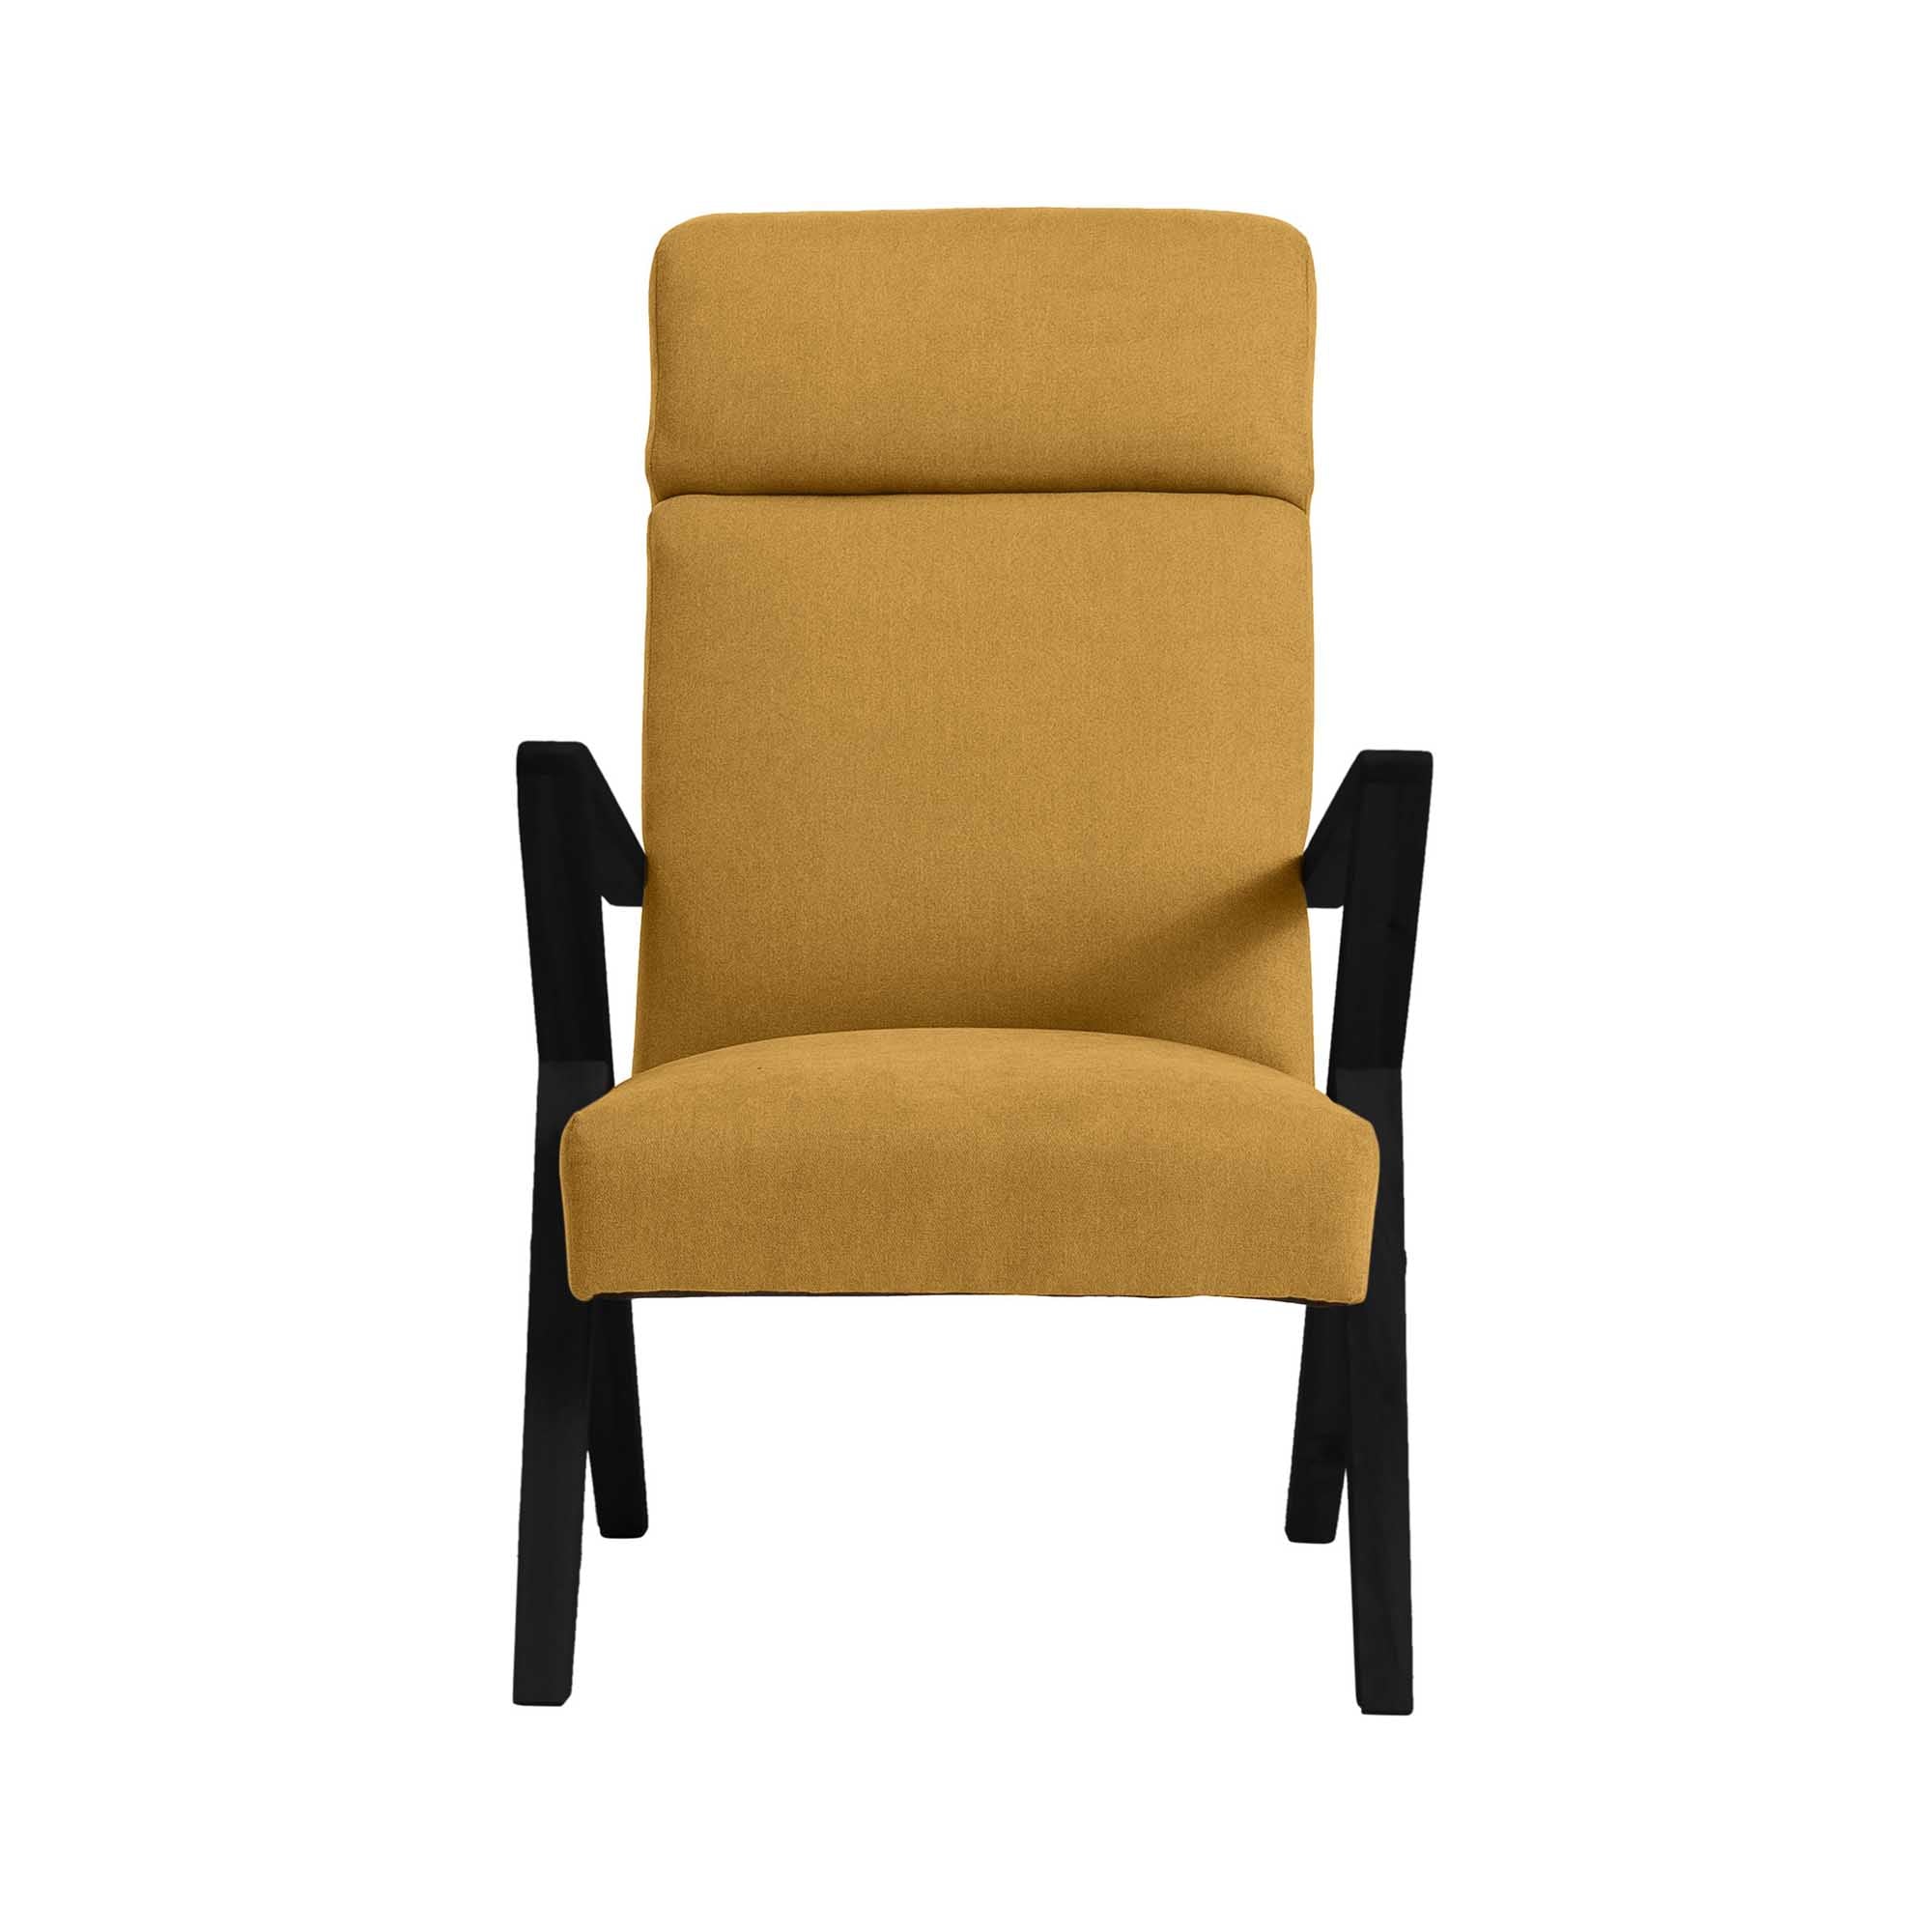 Lounge Chair, Beech Wood Frame, Black Lacquered yellow fabric, front view